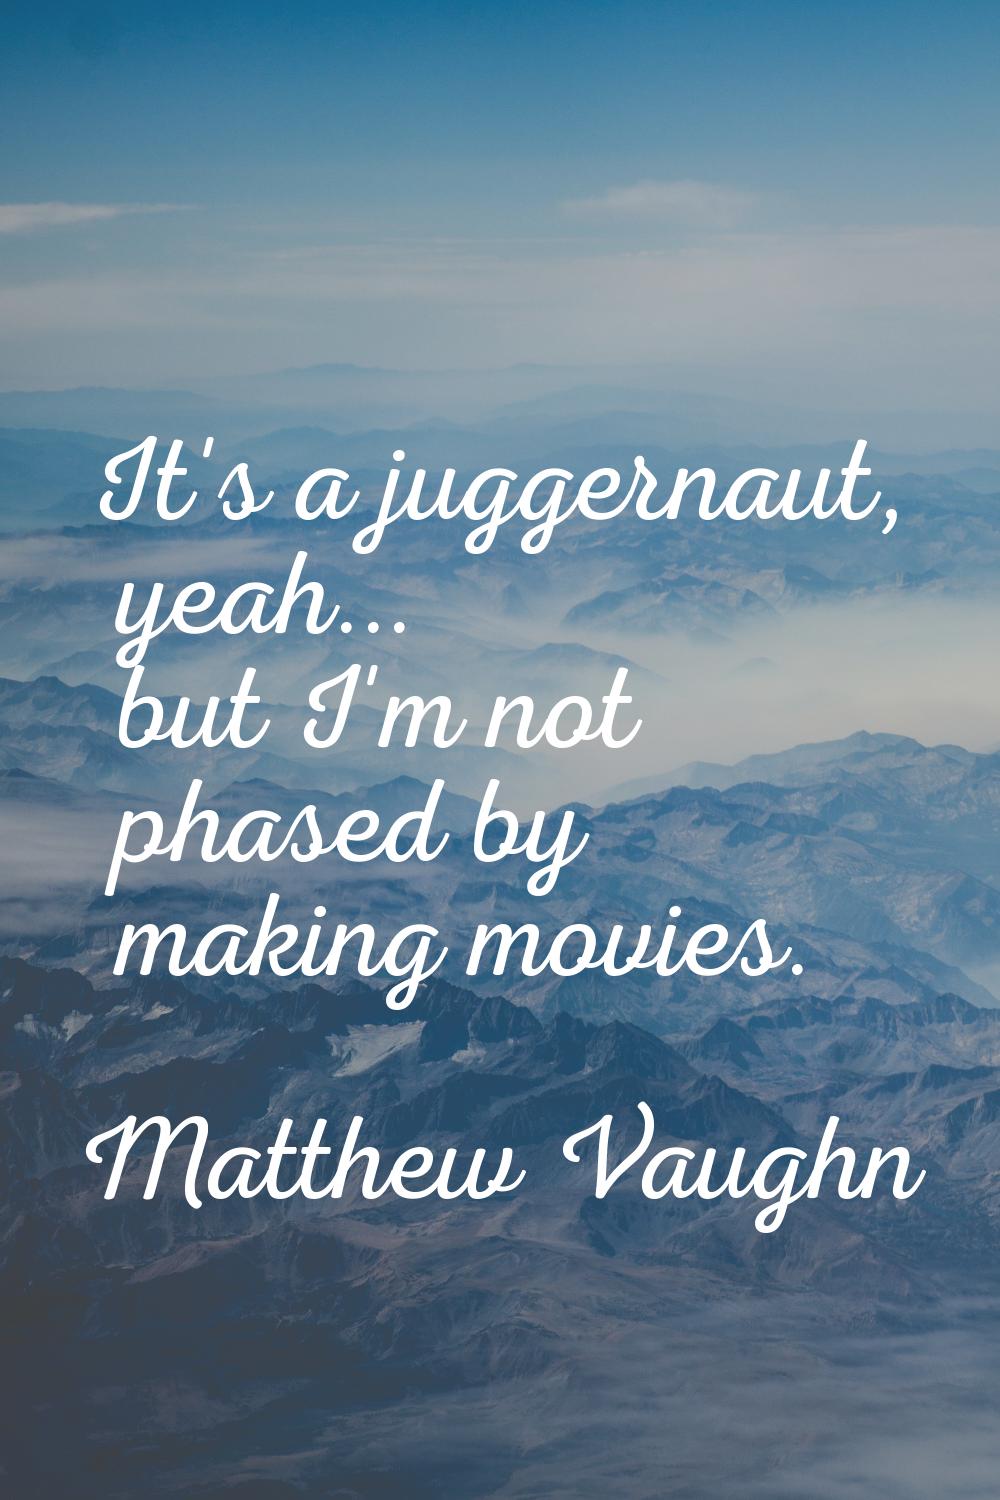 It's a juggernaut, yeah... but I'm not phased by making movies.